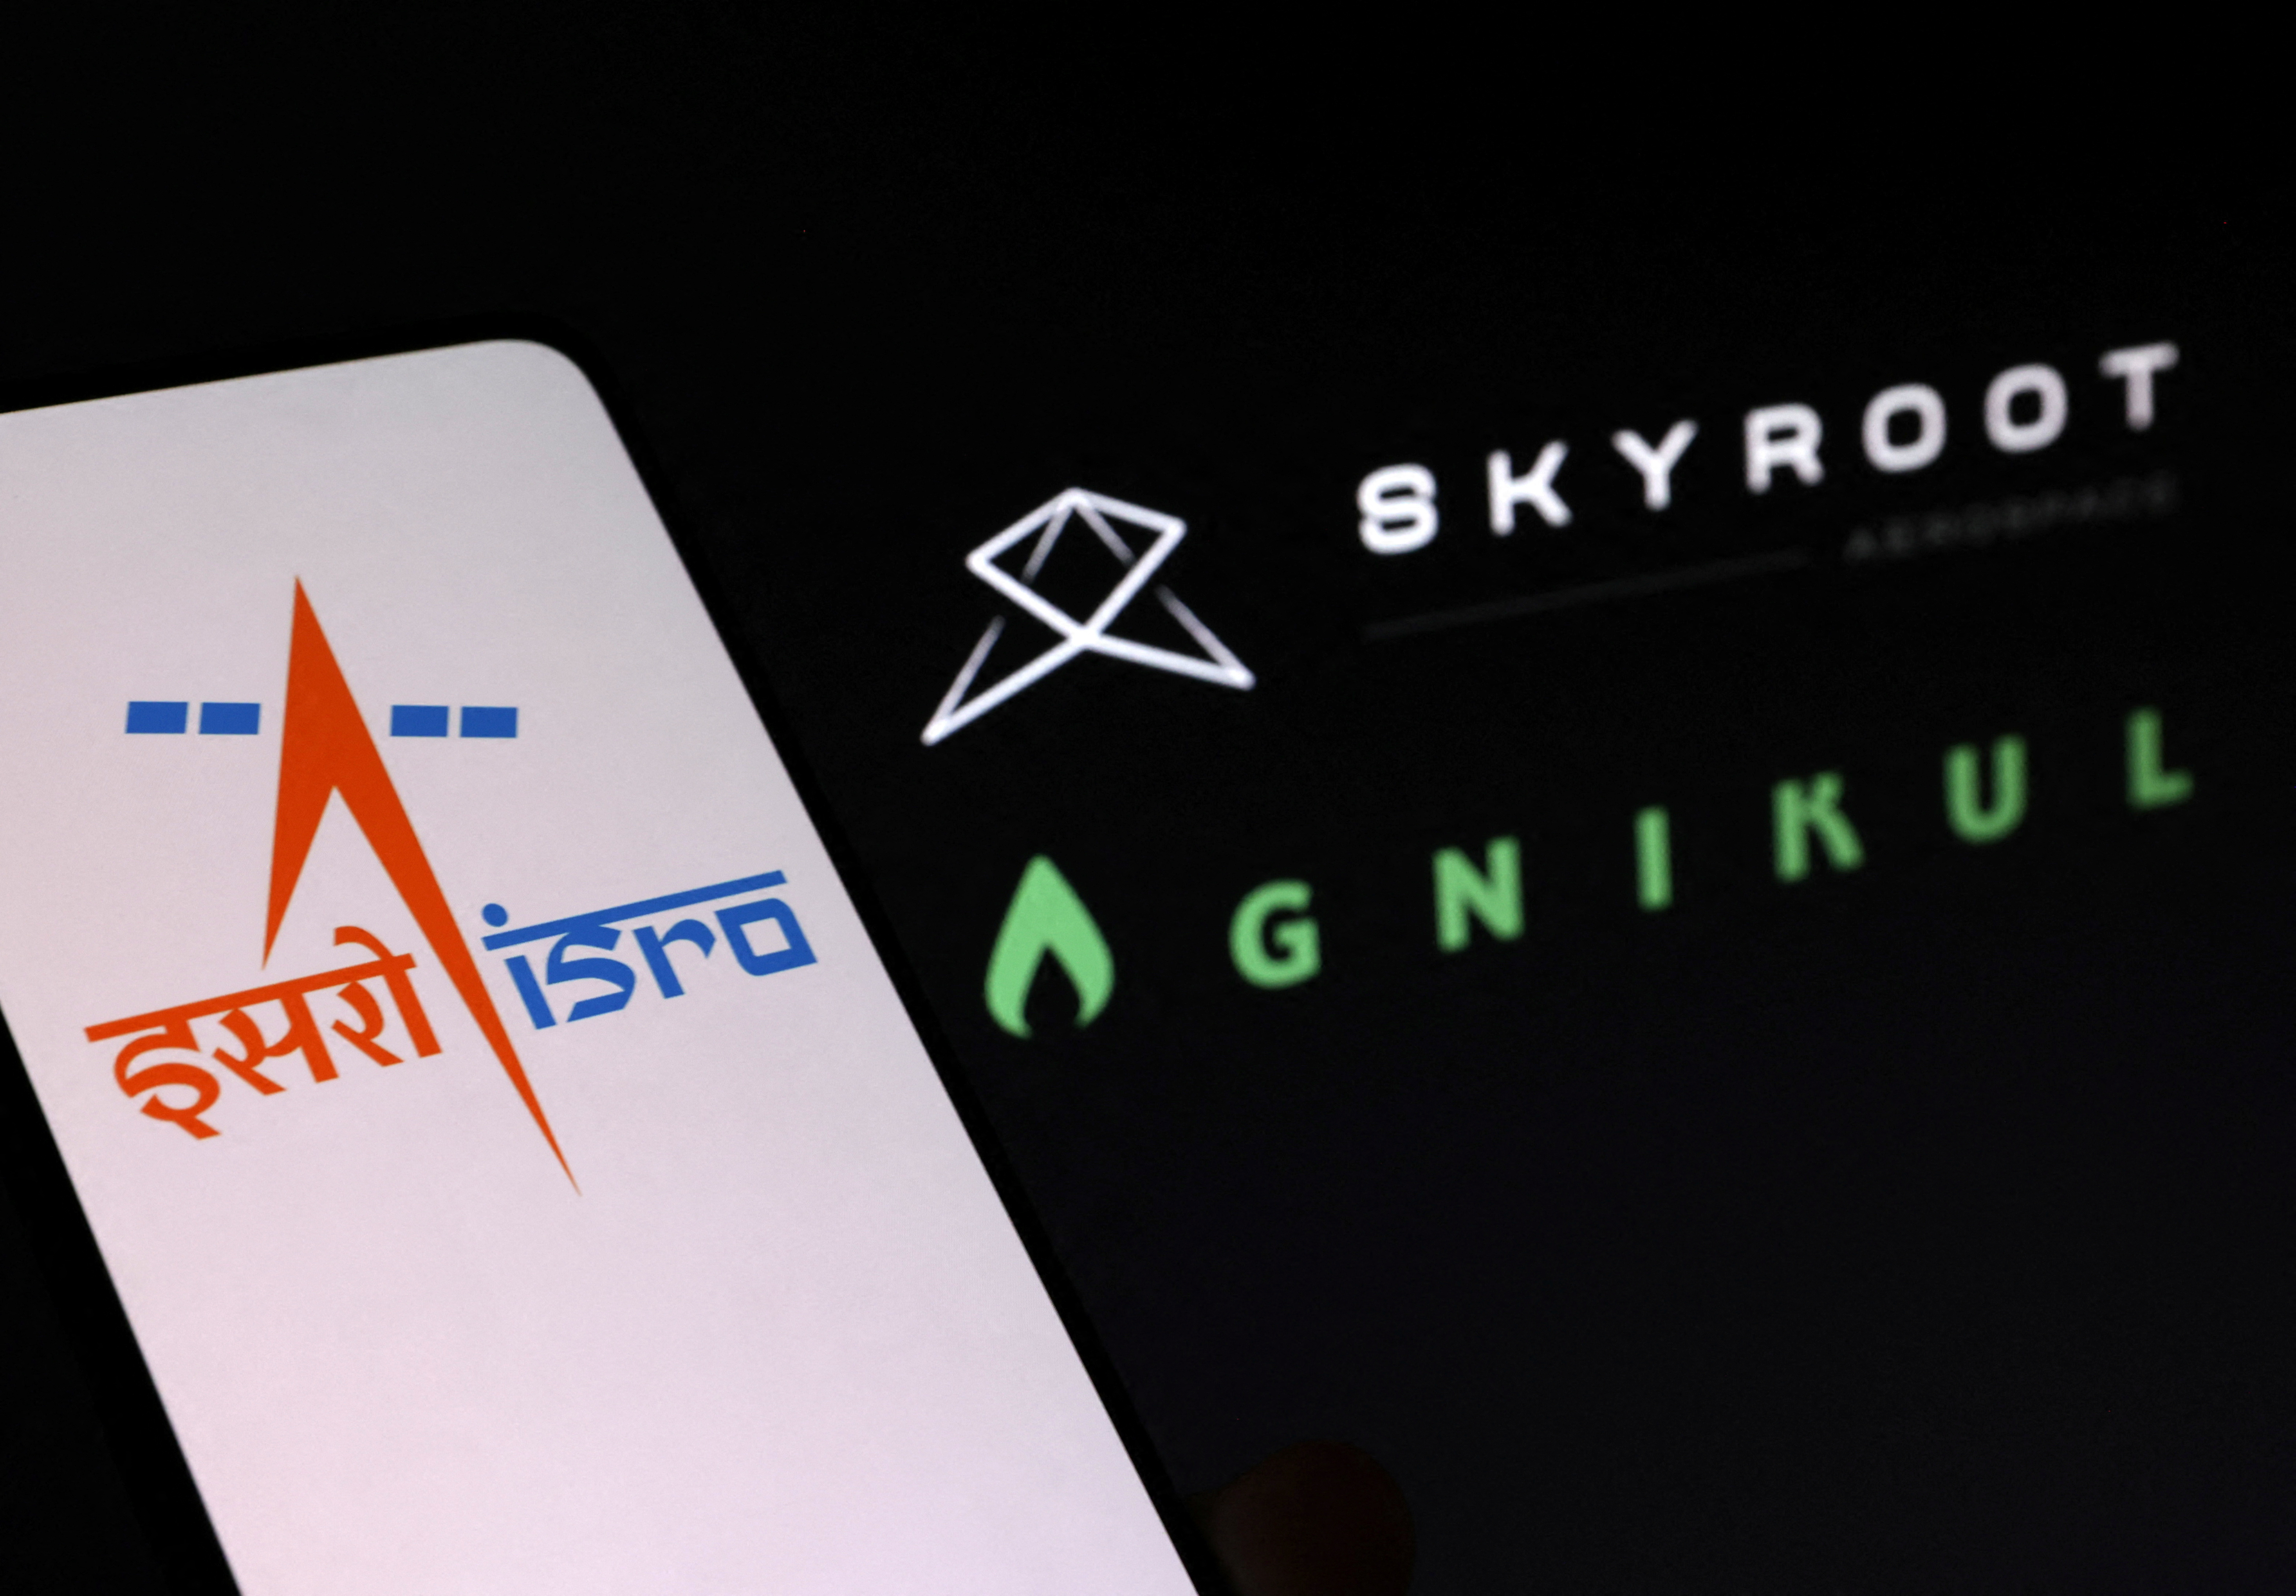 Illustration shows Indian Space Research Organization, Skyroot Aerospace and Agnikul Cosmos logos